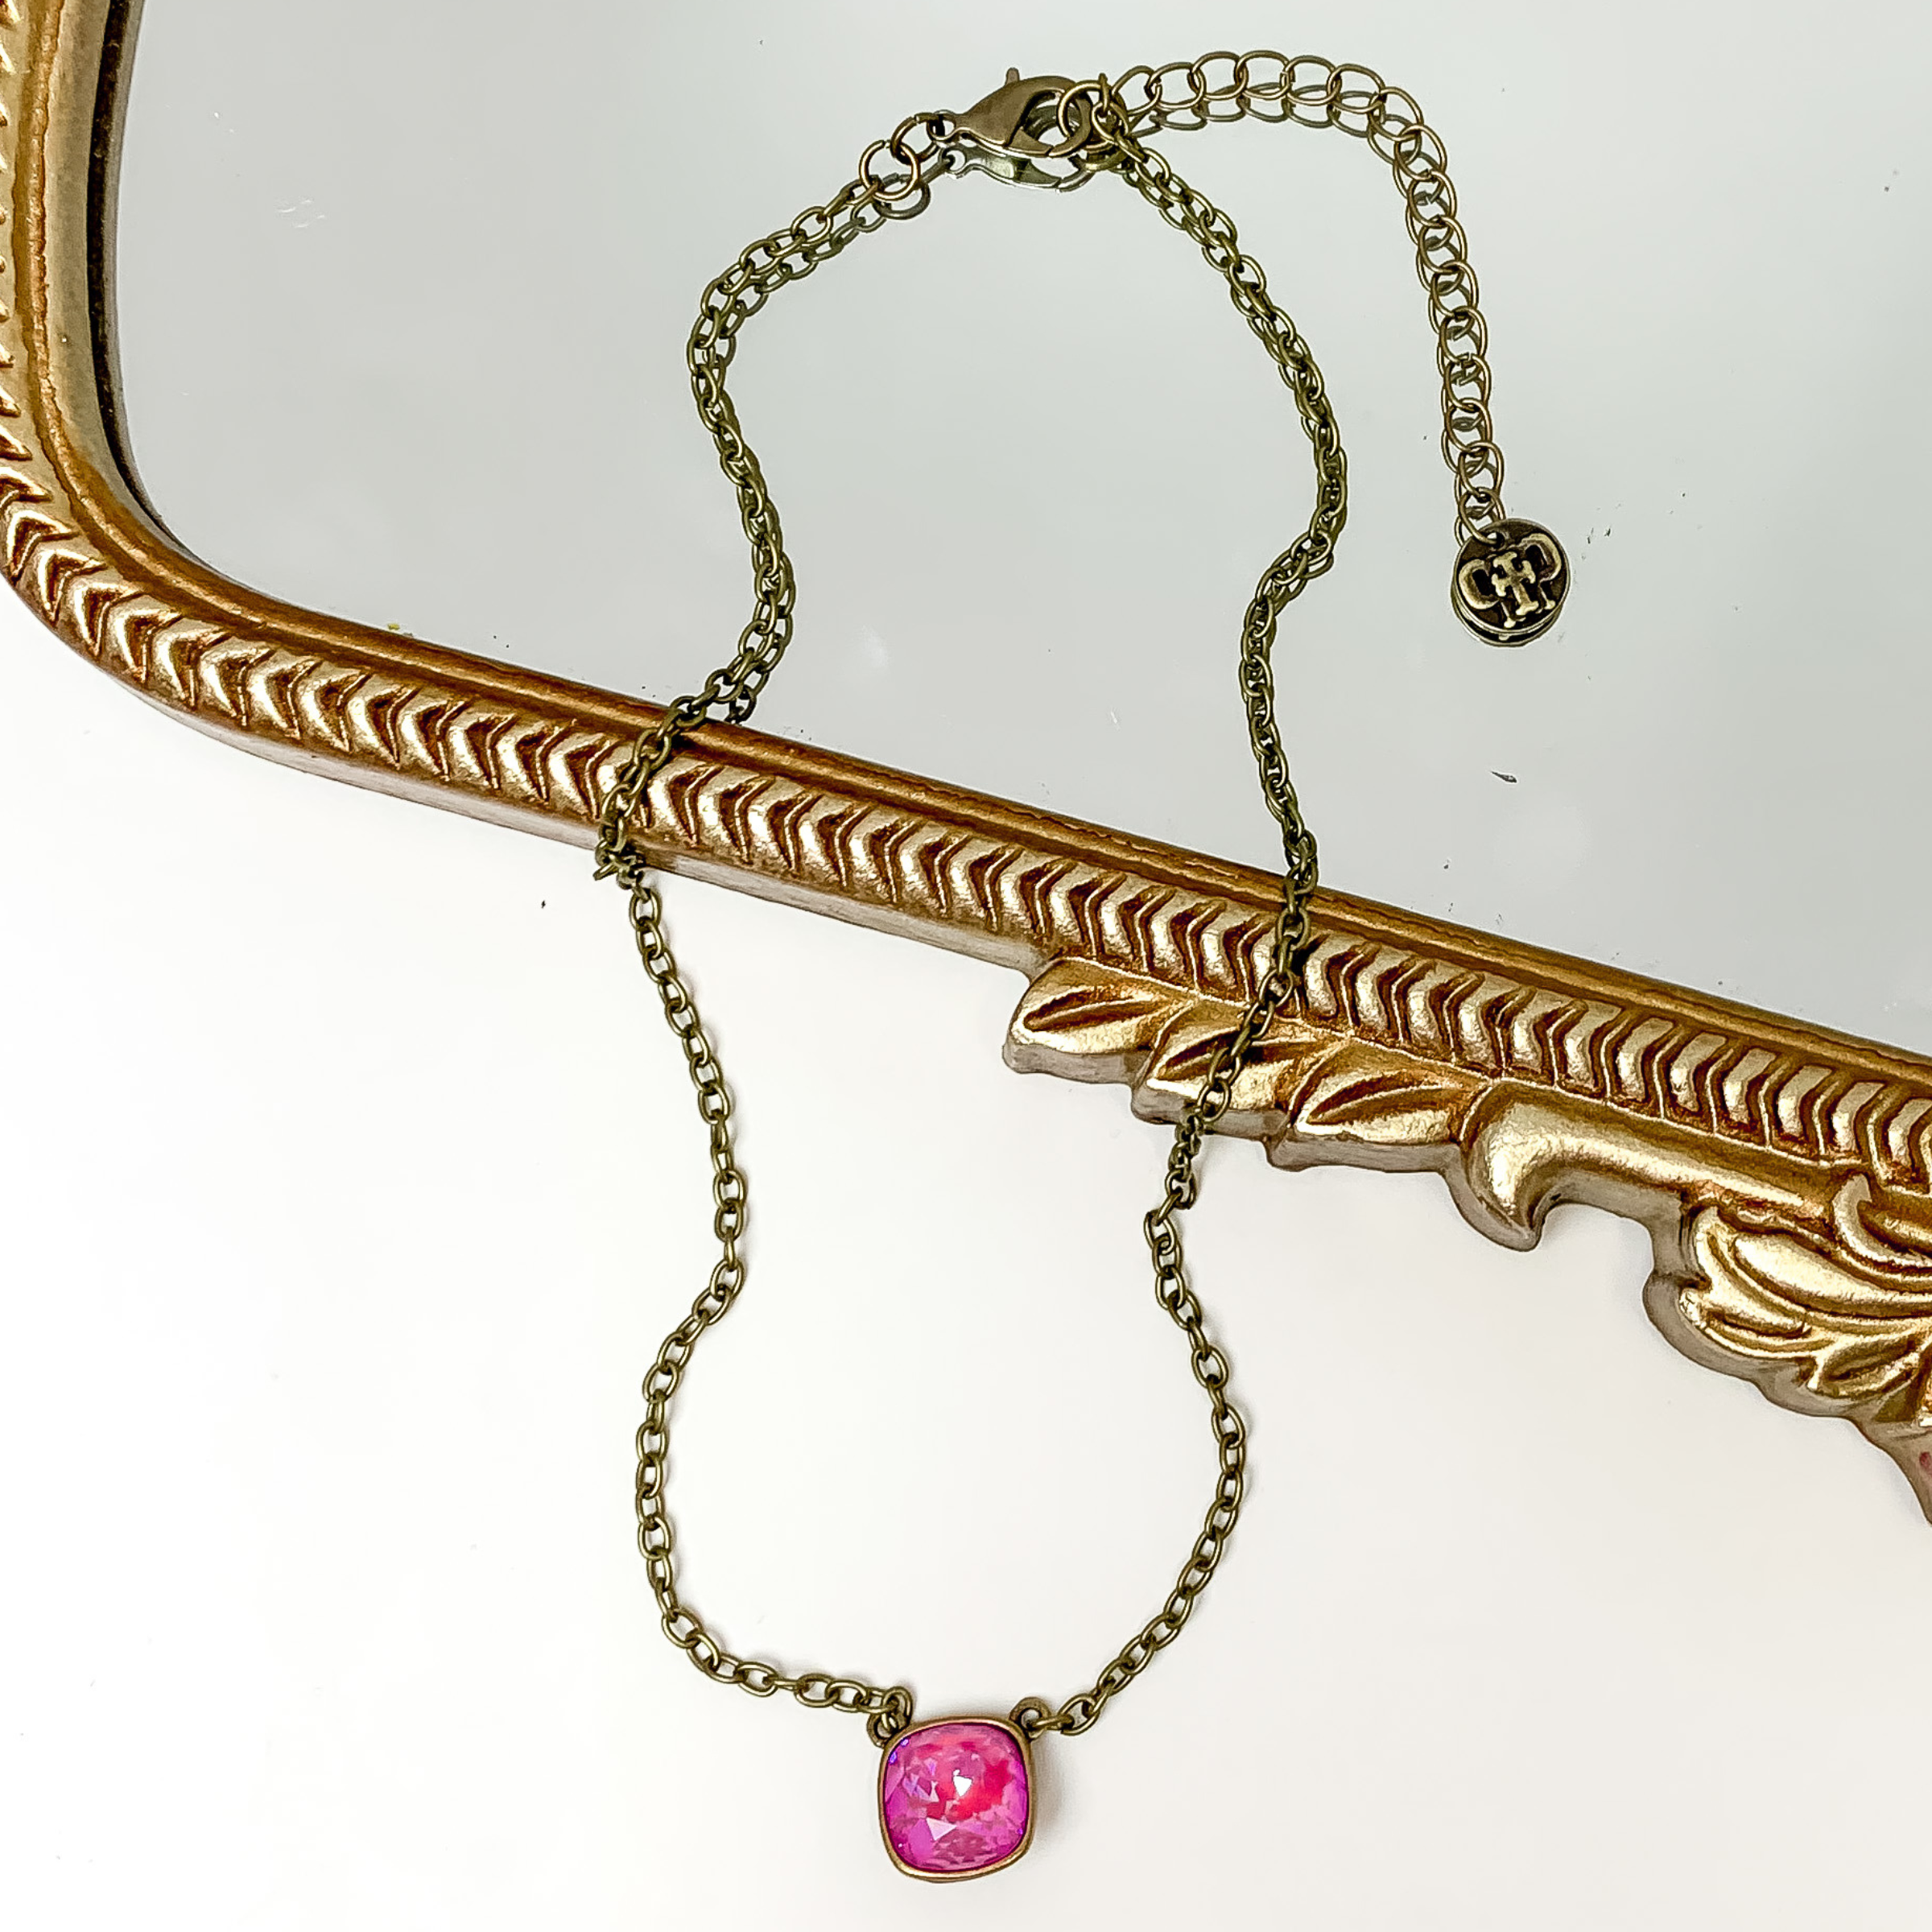 Bronze chain necklace with a pink lotus delight cushion cut crystal. This necklace is pictured partially laying on a gold mirror on a white background.